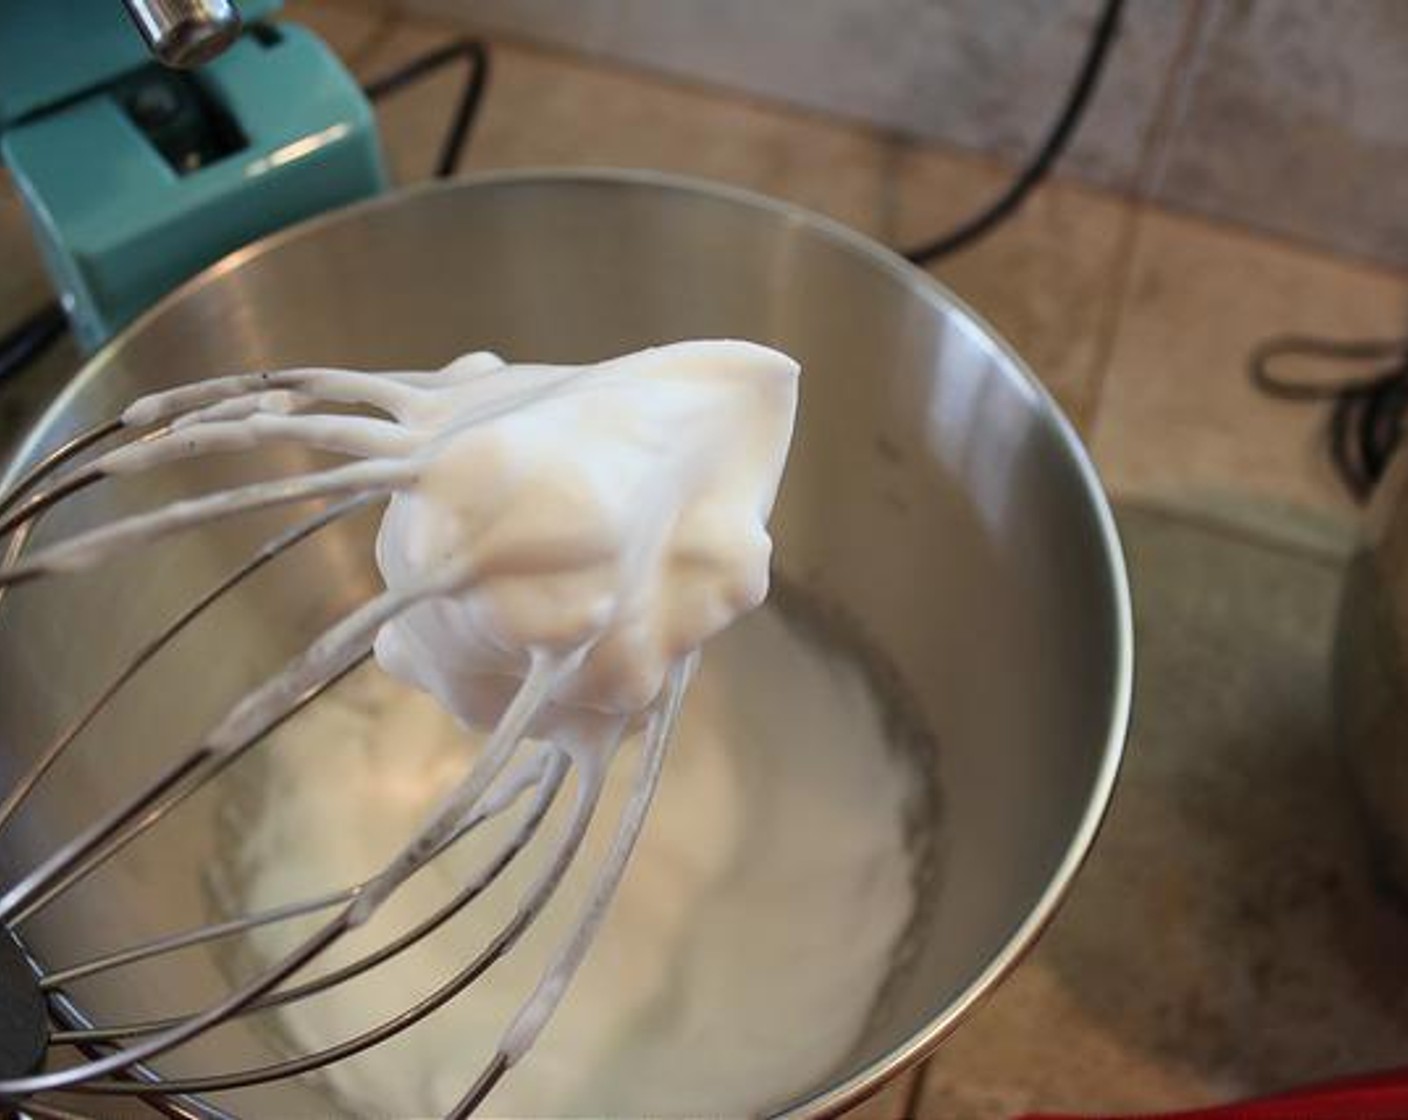 step 3 Whisk on high until stiff peaks form. On my mixer, soft peaks happen around 2-3 minutes & stiff peaks around 4-5 minutes. Once you have stiff peaks, use a spatula to scoop out the fluff and set-aside.